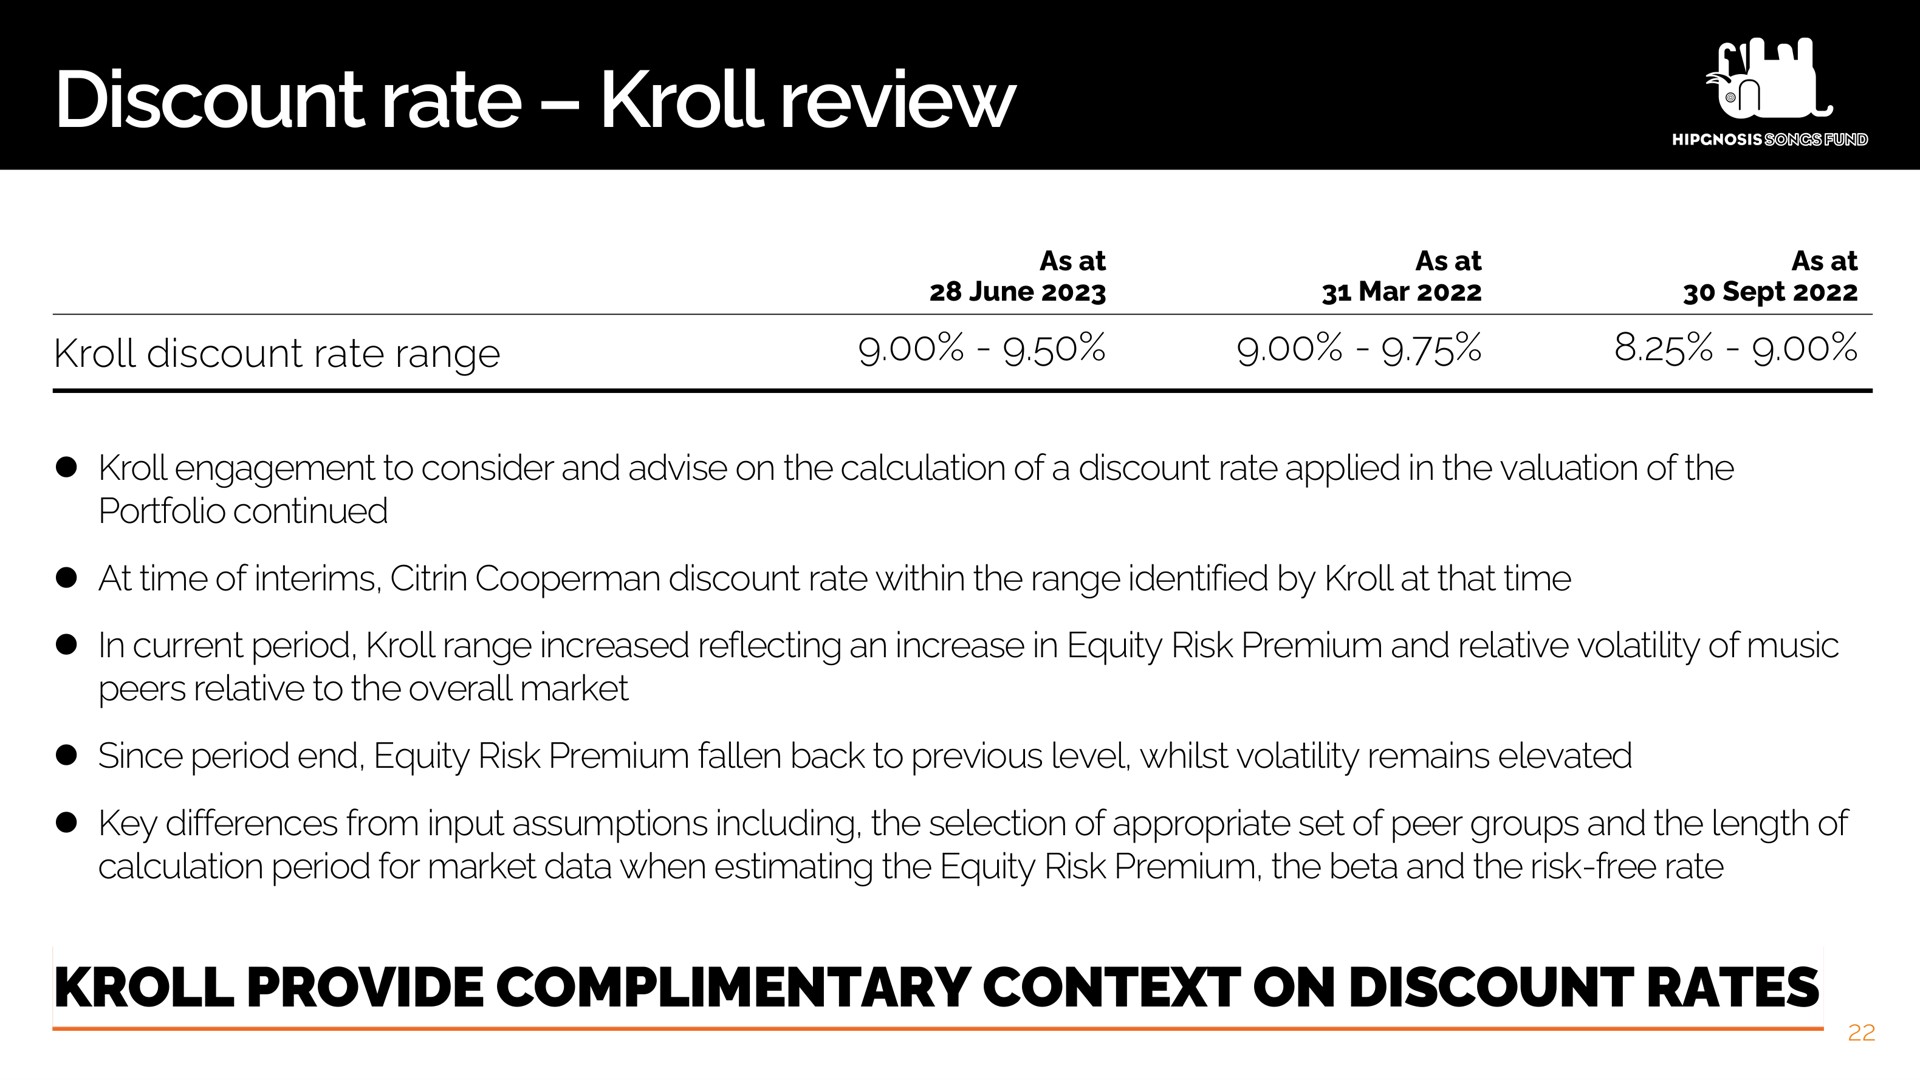 discount rate review provide complimentary context on rates | Hipgnosis Songs Fund